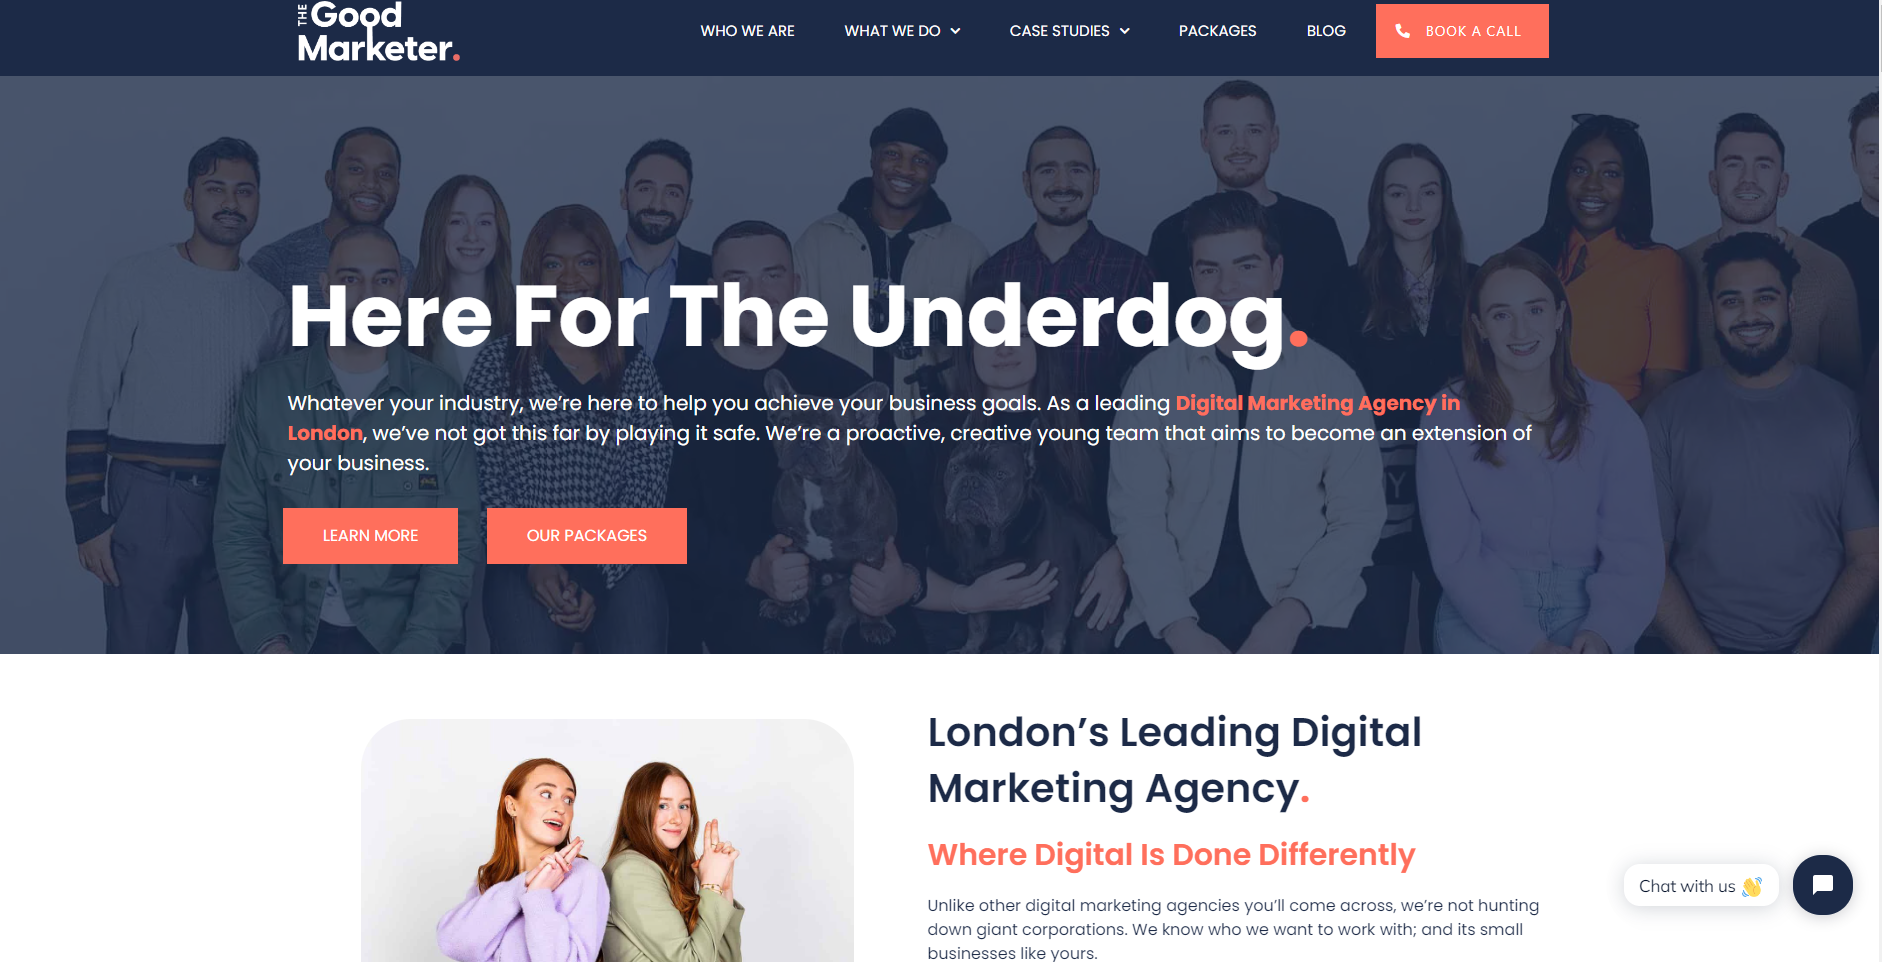 The Good Marketer - The Agency for the underdogs